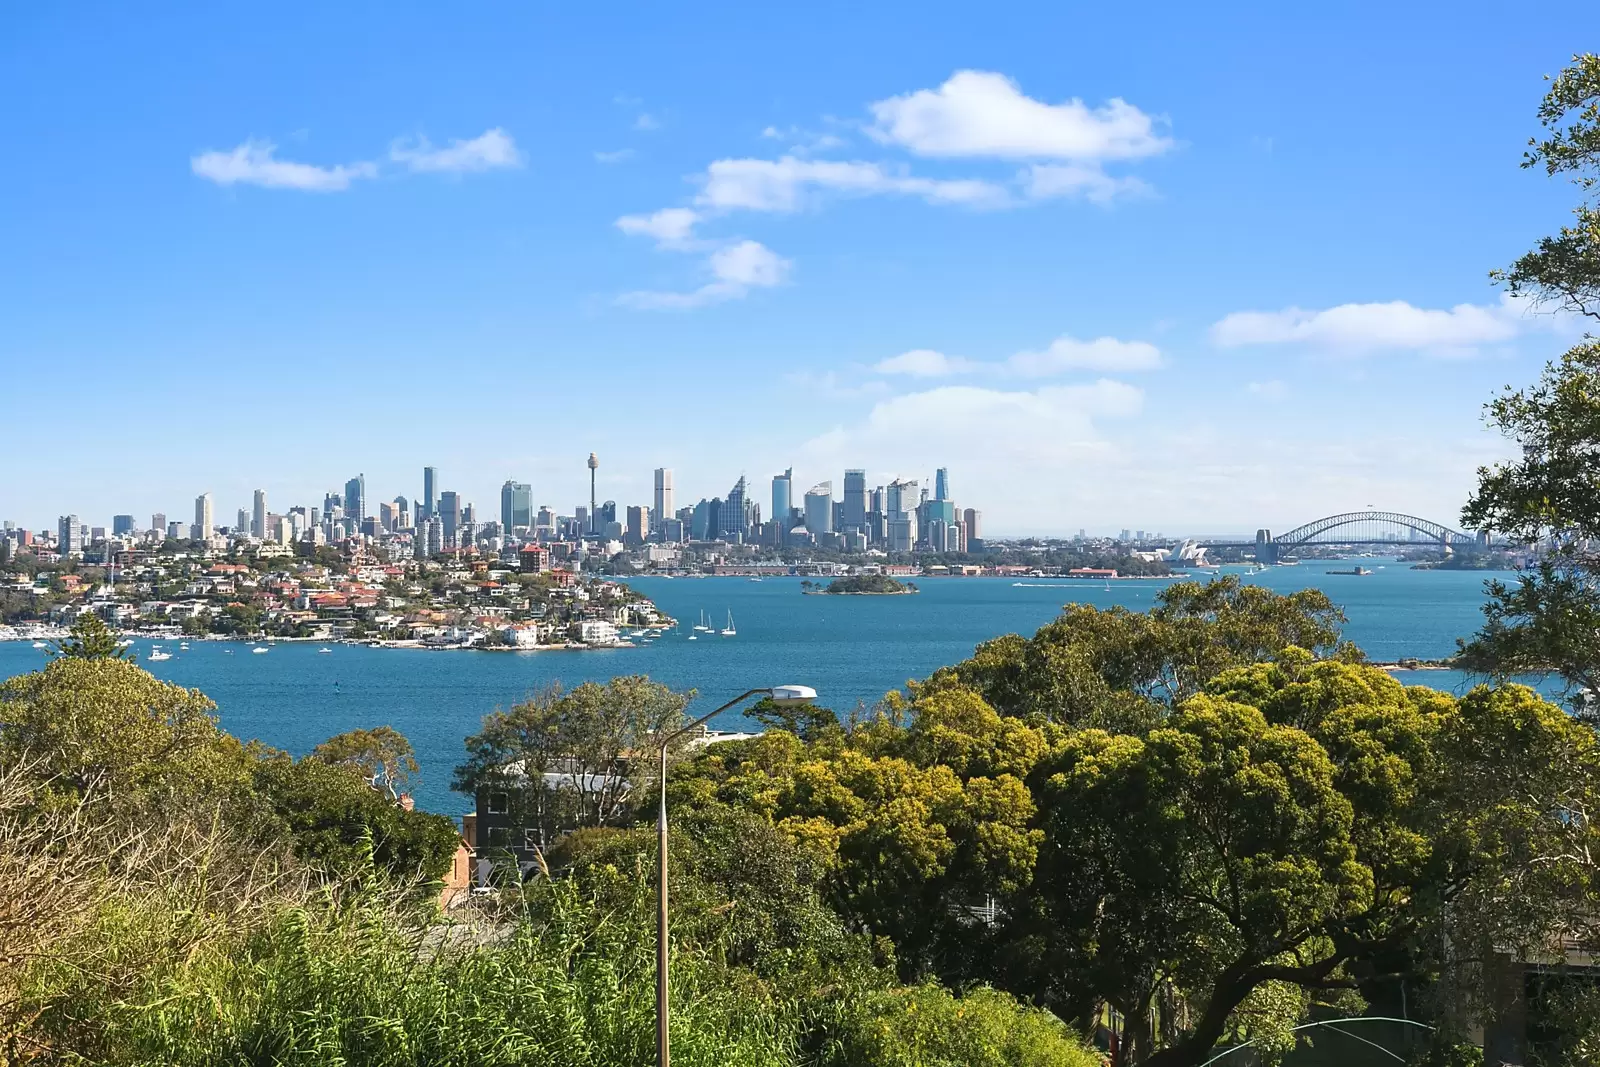 Photo #3: 5/30 Dalley Avenue, Vaucluse - Sold by Sydney Sotheby's International Realty